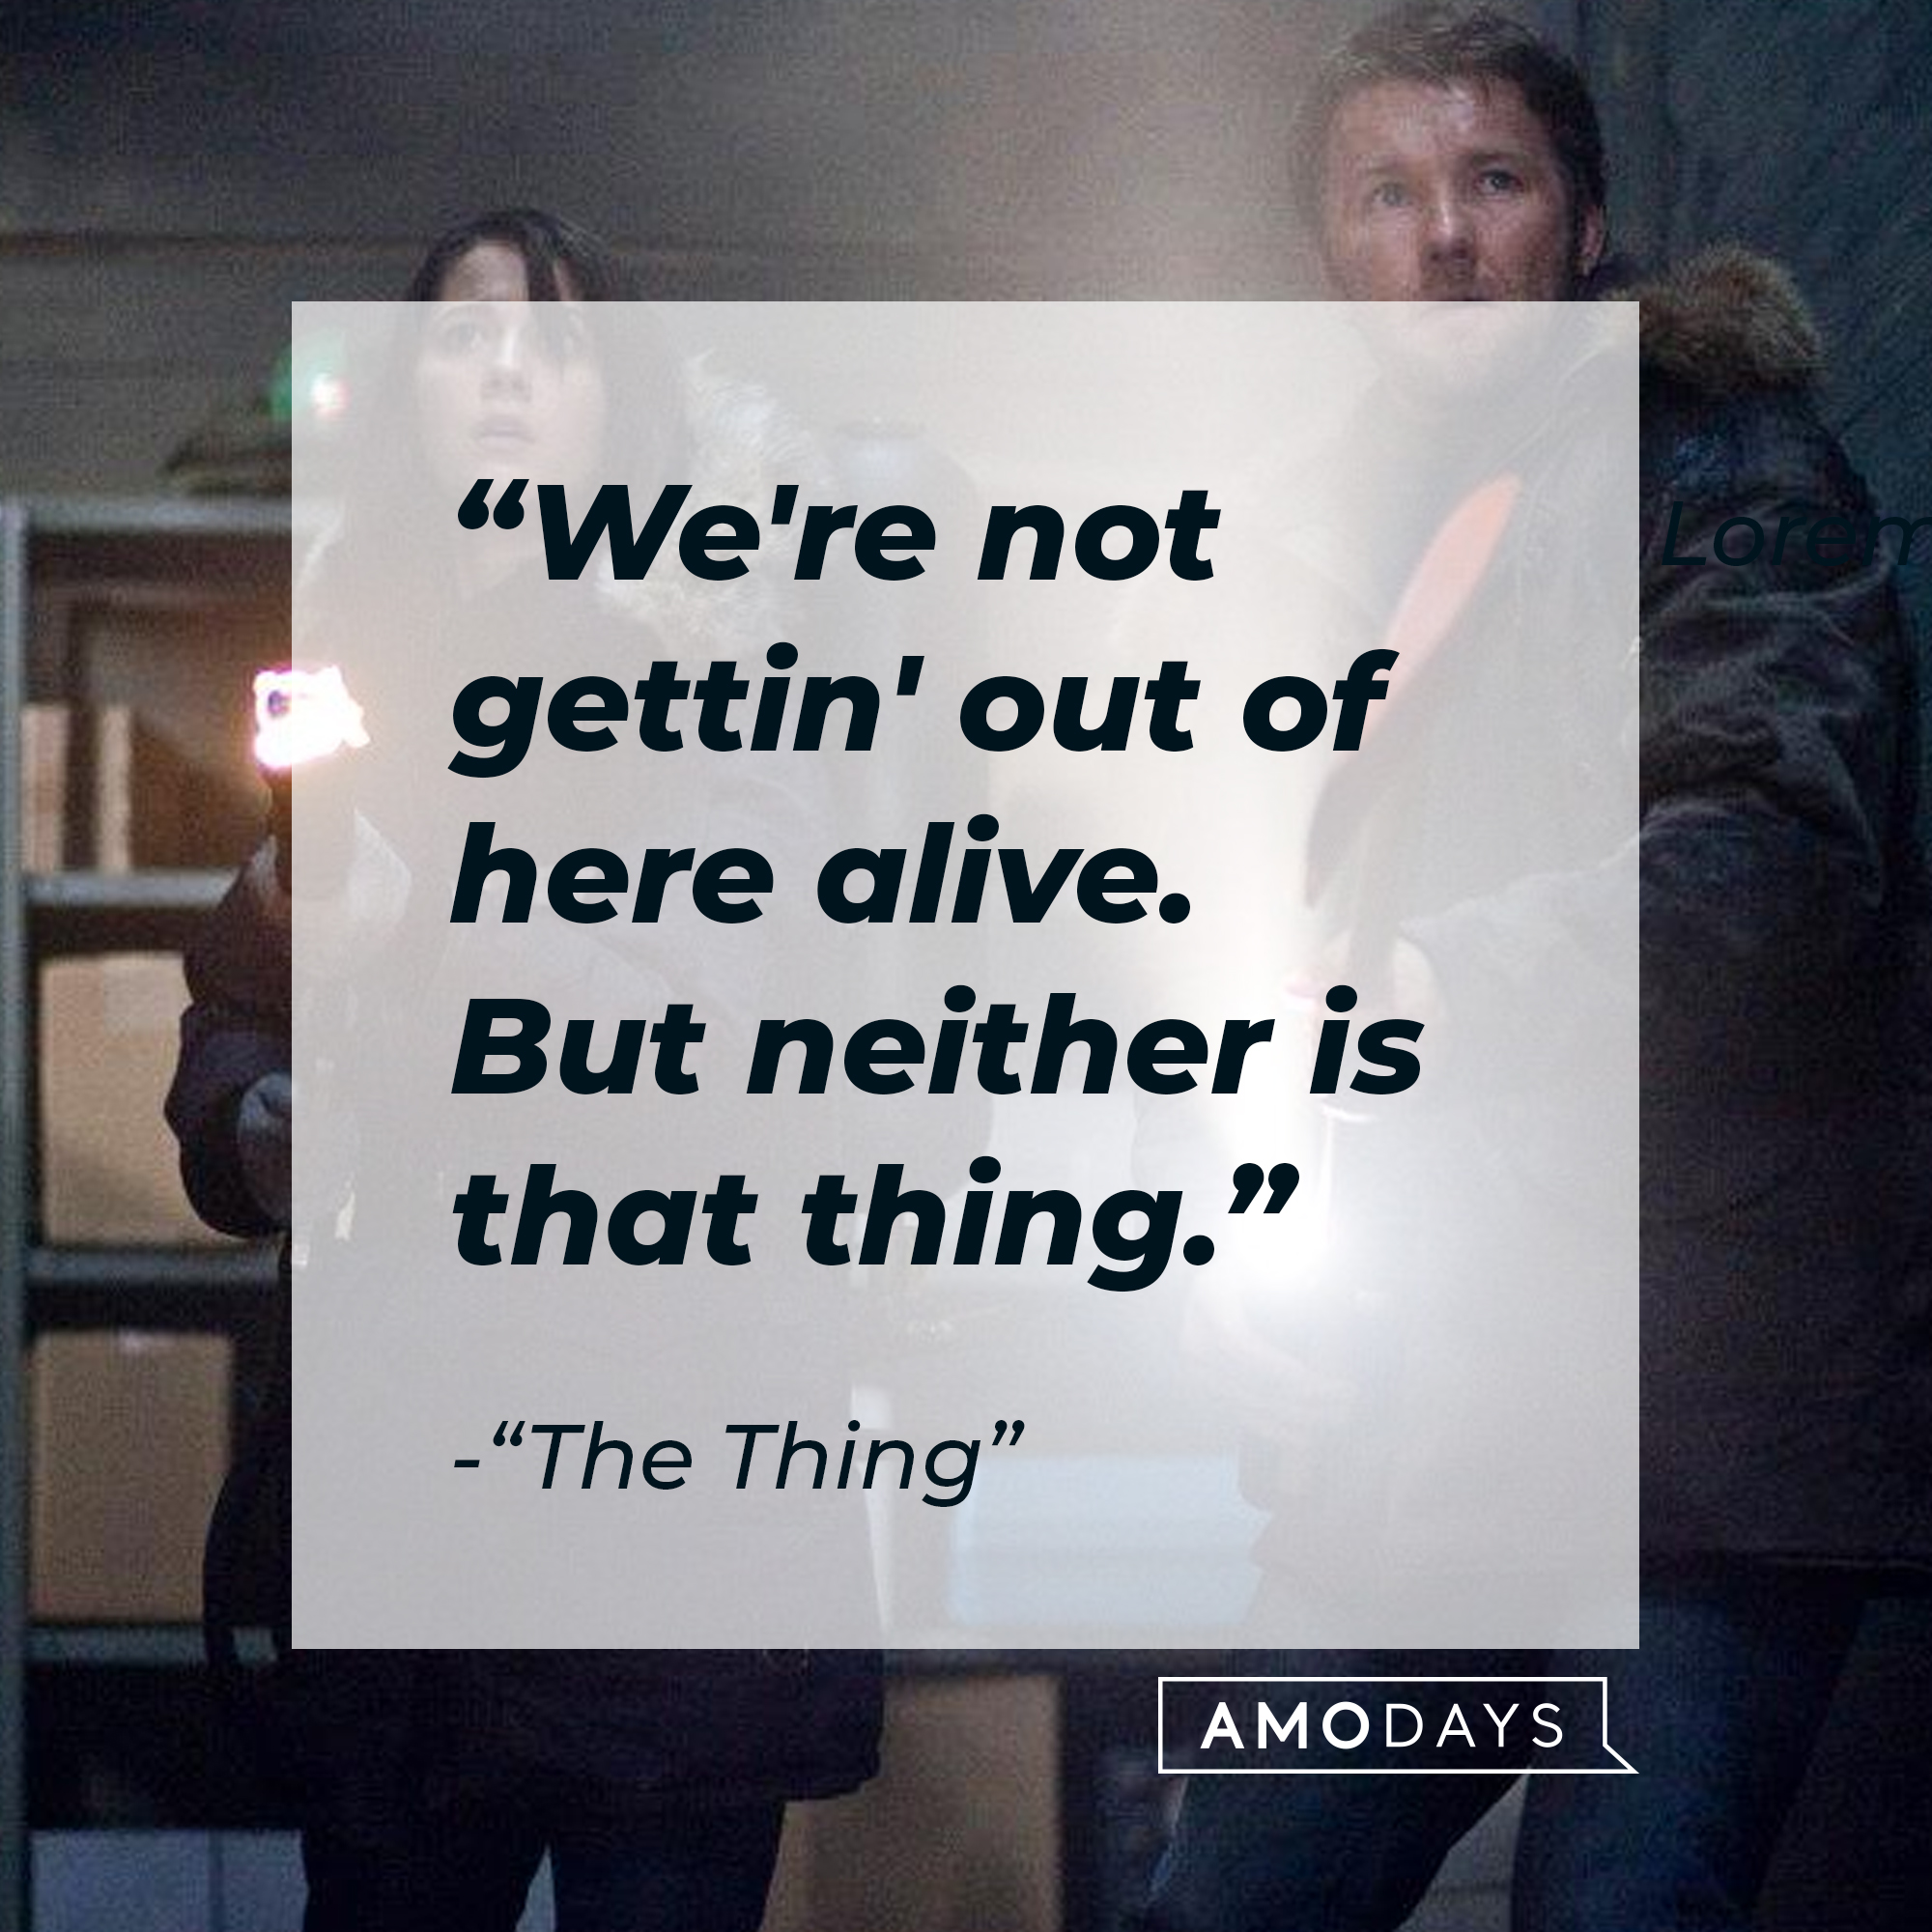 "The Thing" quote: "We're not gettin' out of here alive. But neither is that thing." | Source: facebook.com/thethingmovie